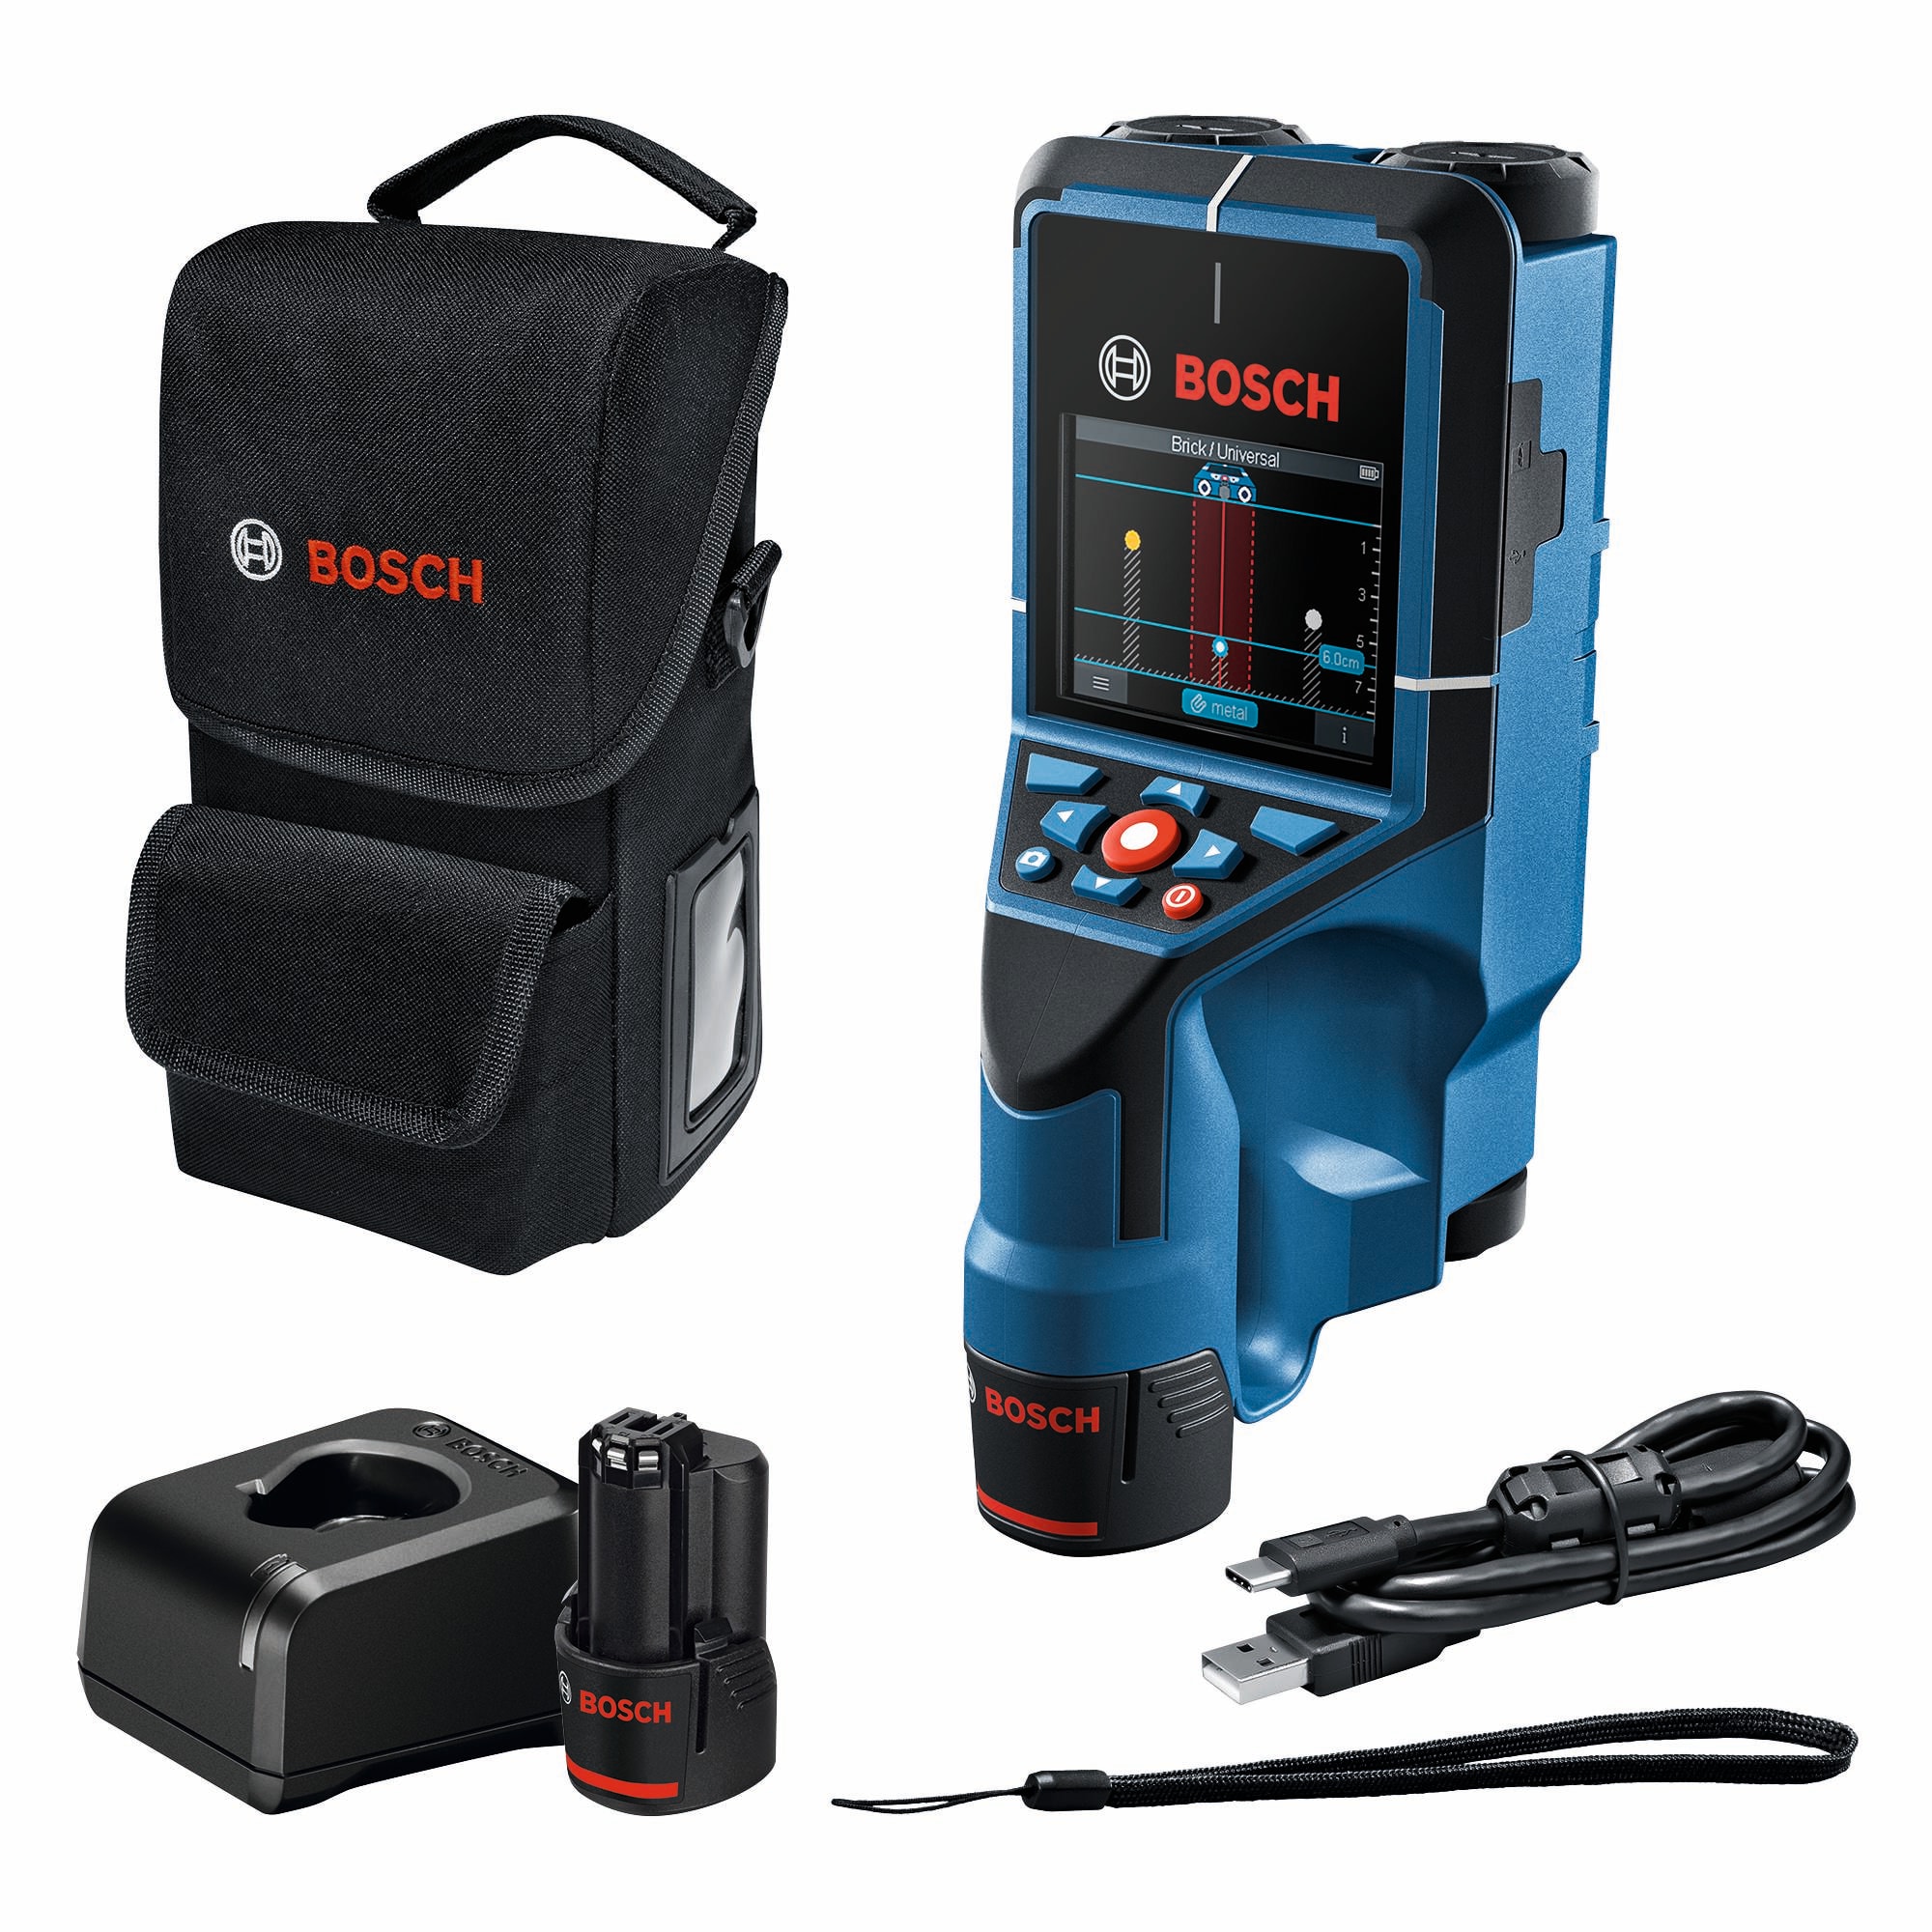 Bosch 12X Max 7.9-in Scan Depth Electric/Metal/Wood Finder in the